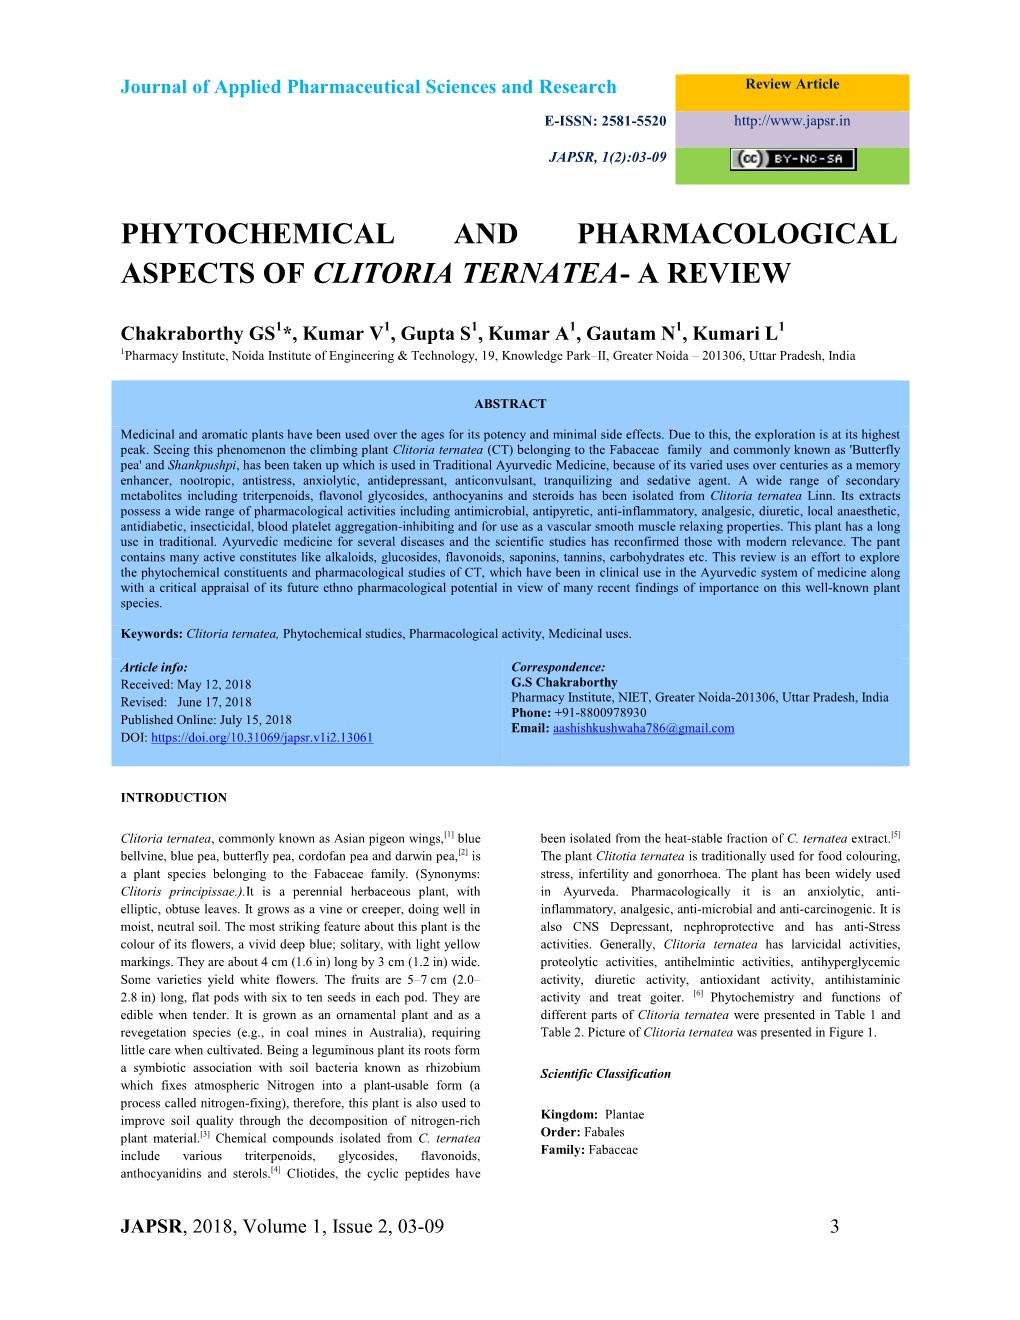 Phytochemical and Pharmacological Aspects of Clitoria Ternatea- a Review